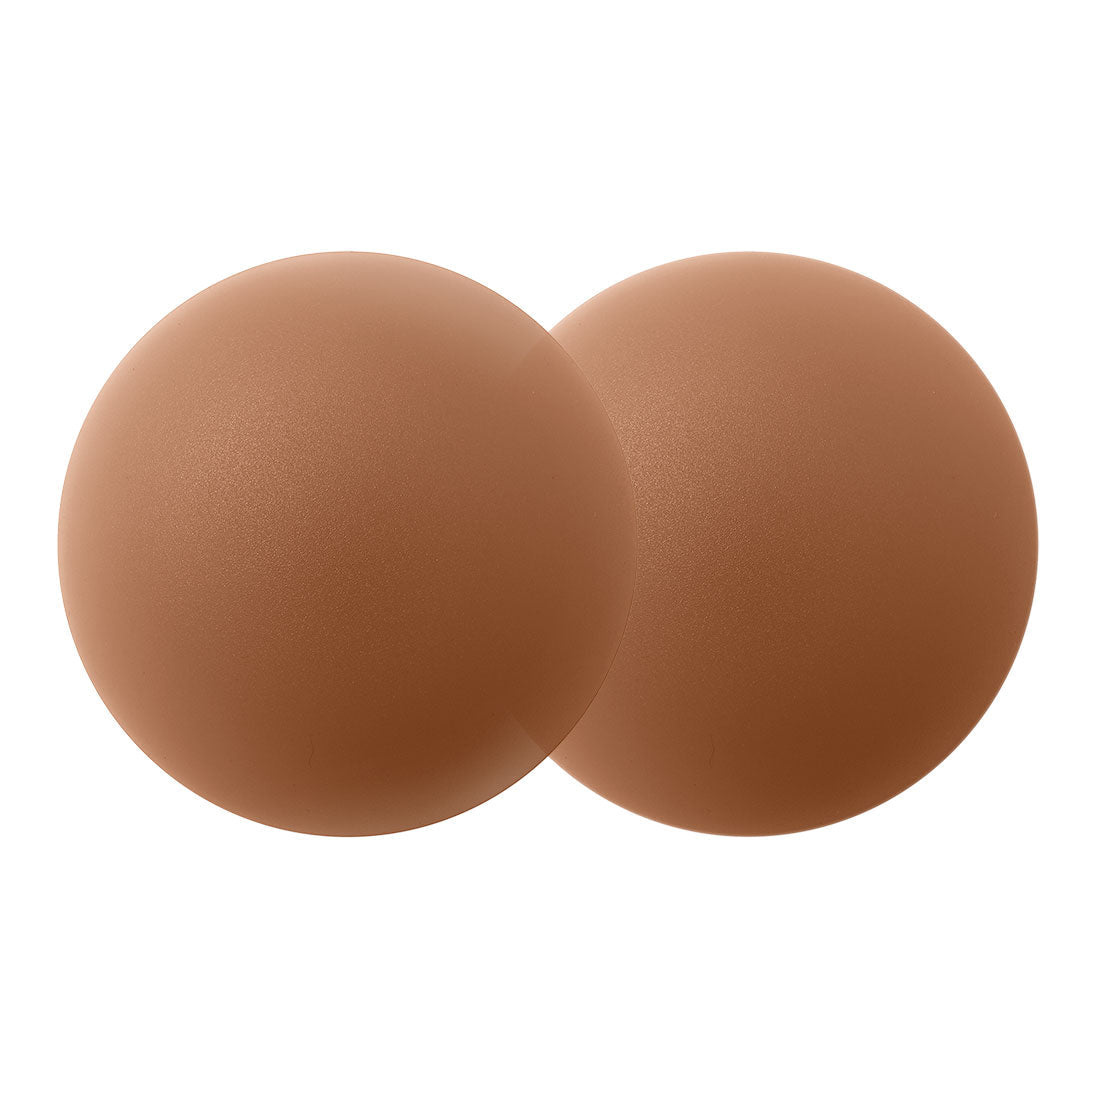 https://fussstyle.com/cdn/shop/products/silicone-sticky-nipple-covers-pasties-nippies-skin-adhesive-loose-pair-dark_1728x_81f58634-fc19-4eb3-8a8c-18372e48c69d_1024x1024@2x.jpg?v=1655347486